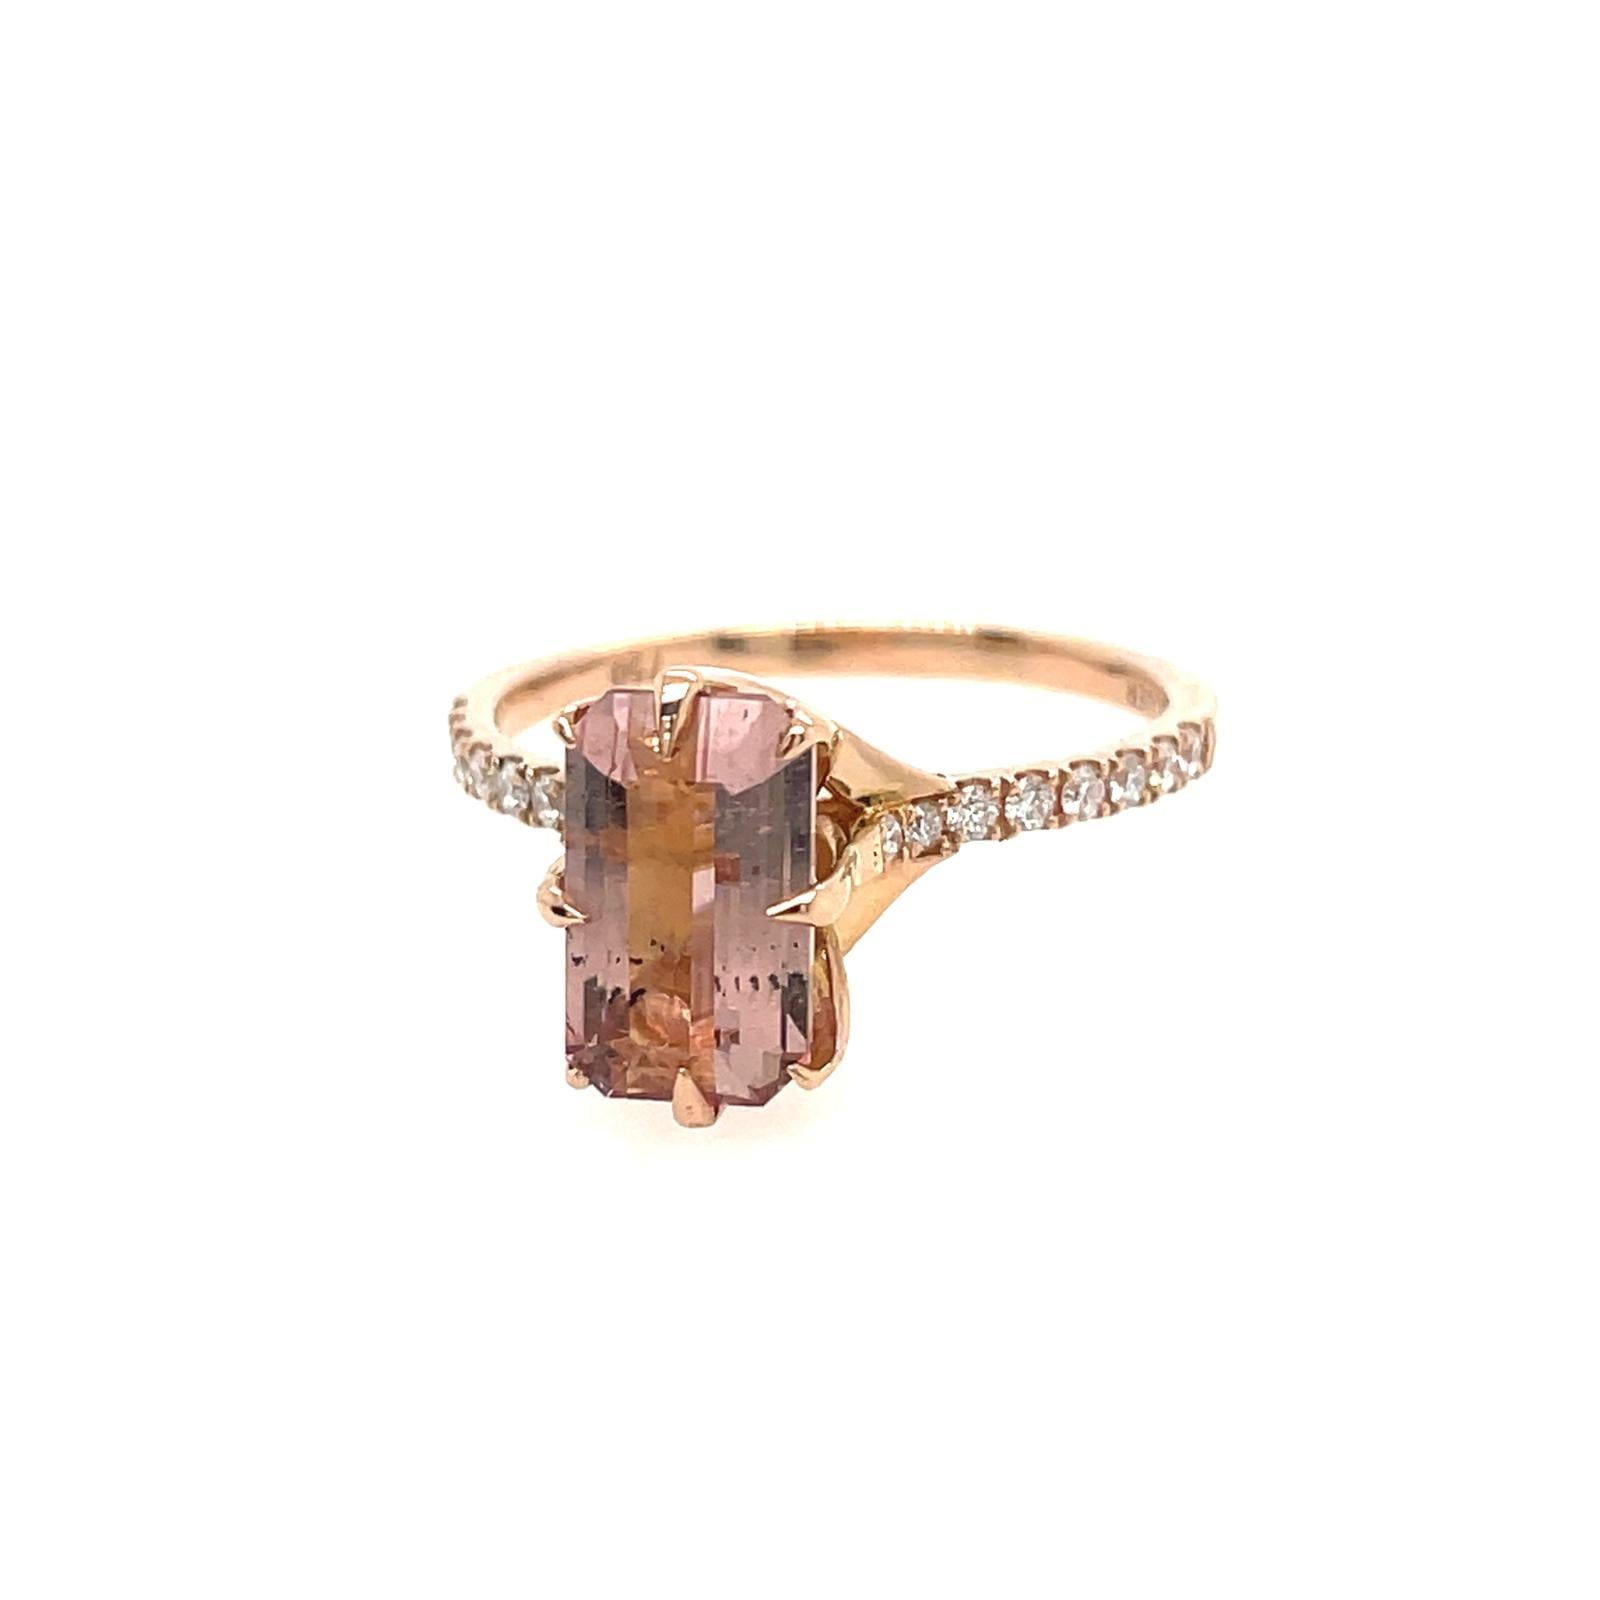 For Sale:  2.06ct Blush pink tourmaline and diamond ring in 18ct rose gold